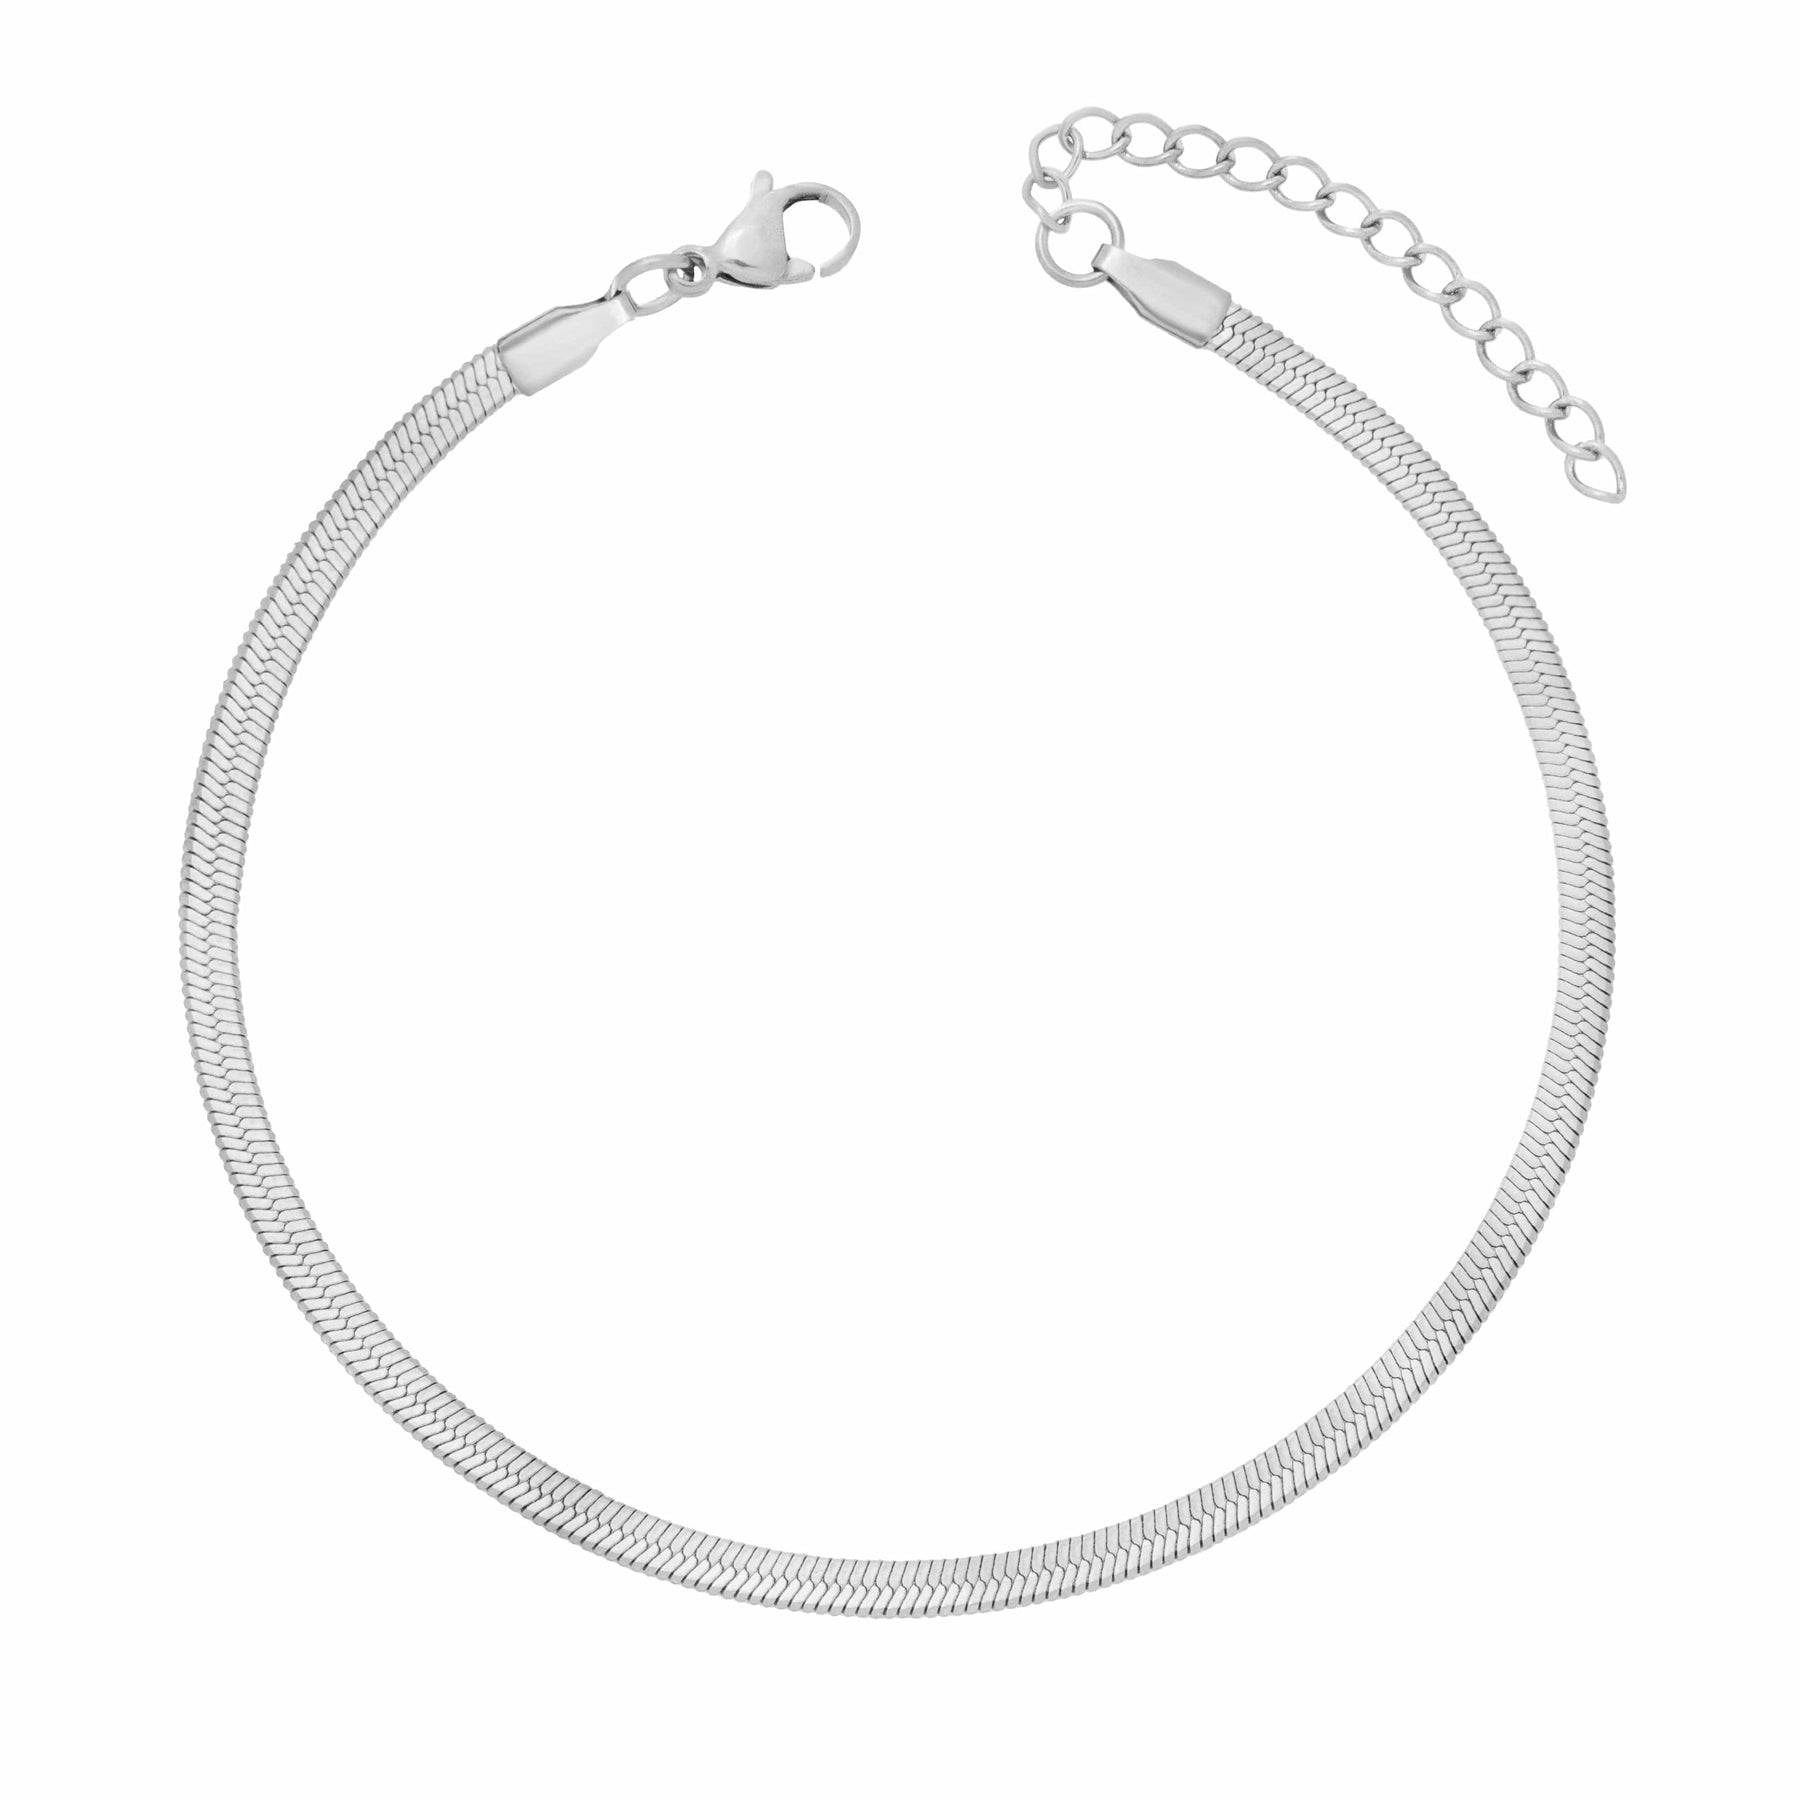 BohoMoon Stainless Steel Serena Anklet Silver